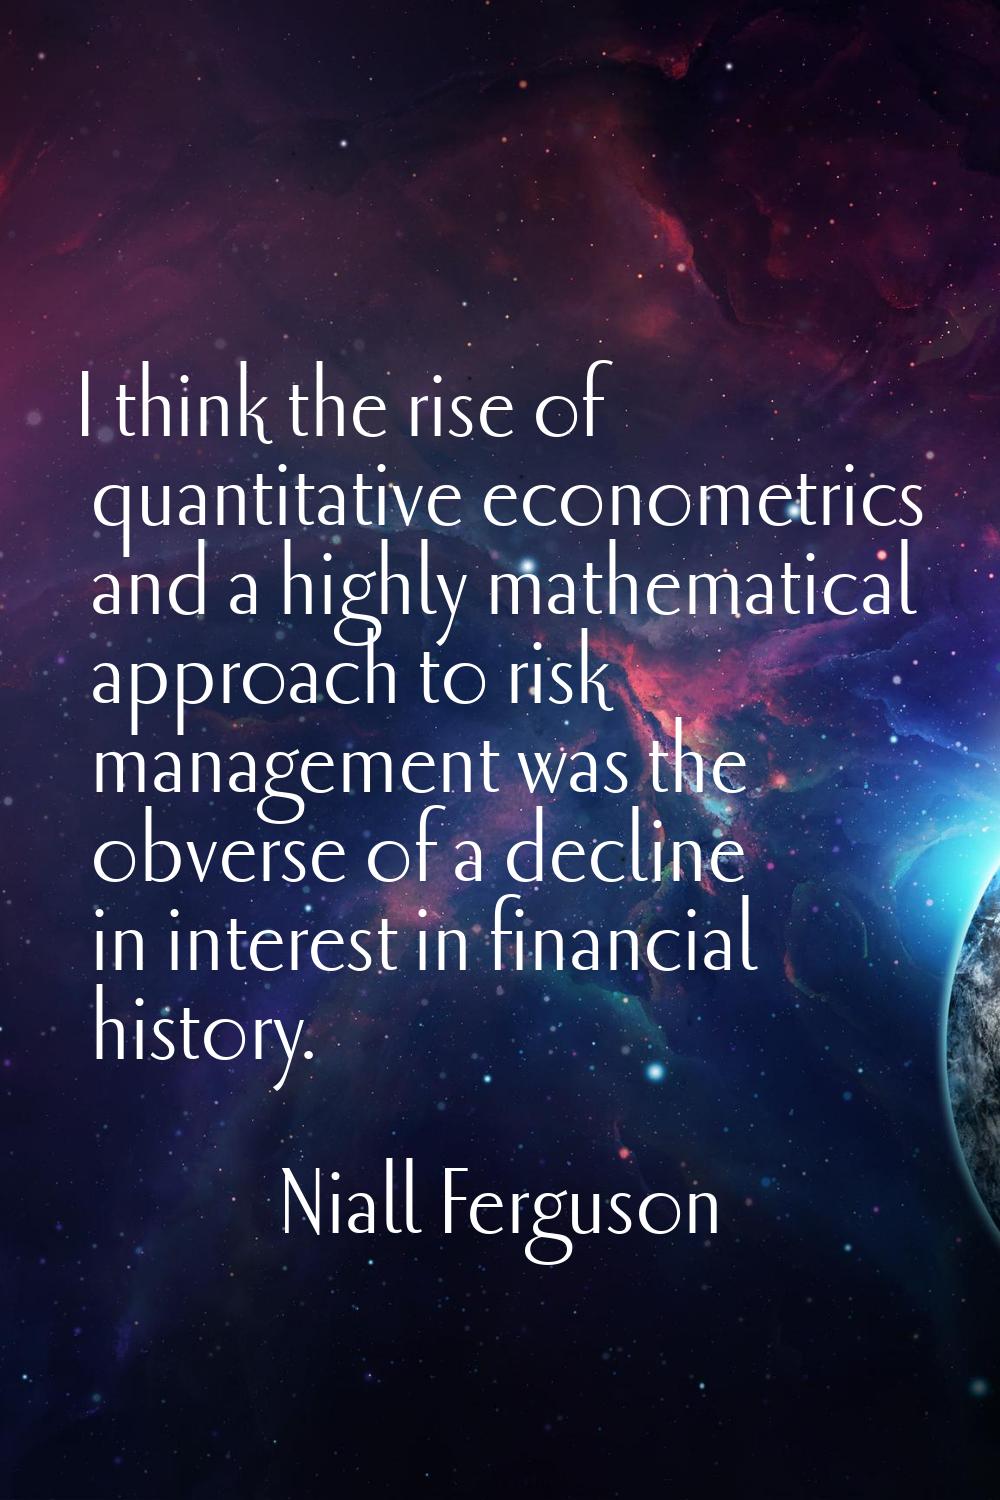 I think the rise of quantitative econometrics and a highly mathematical approach to risk management